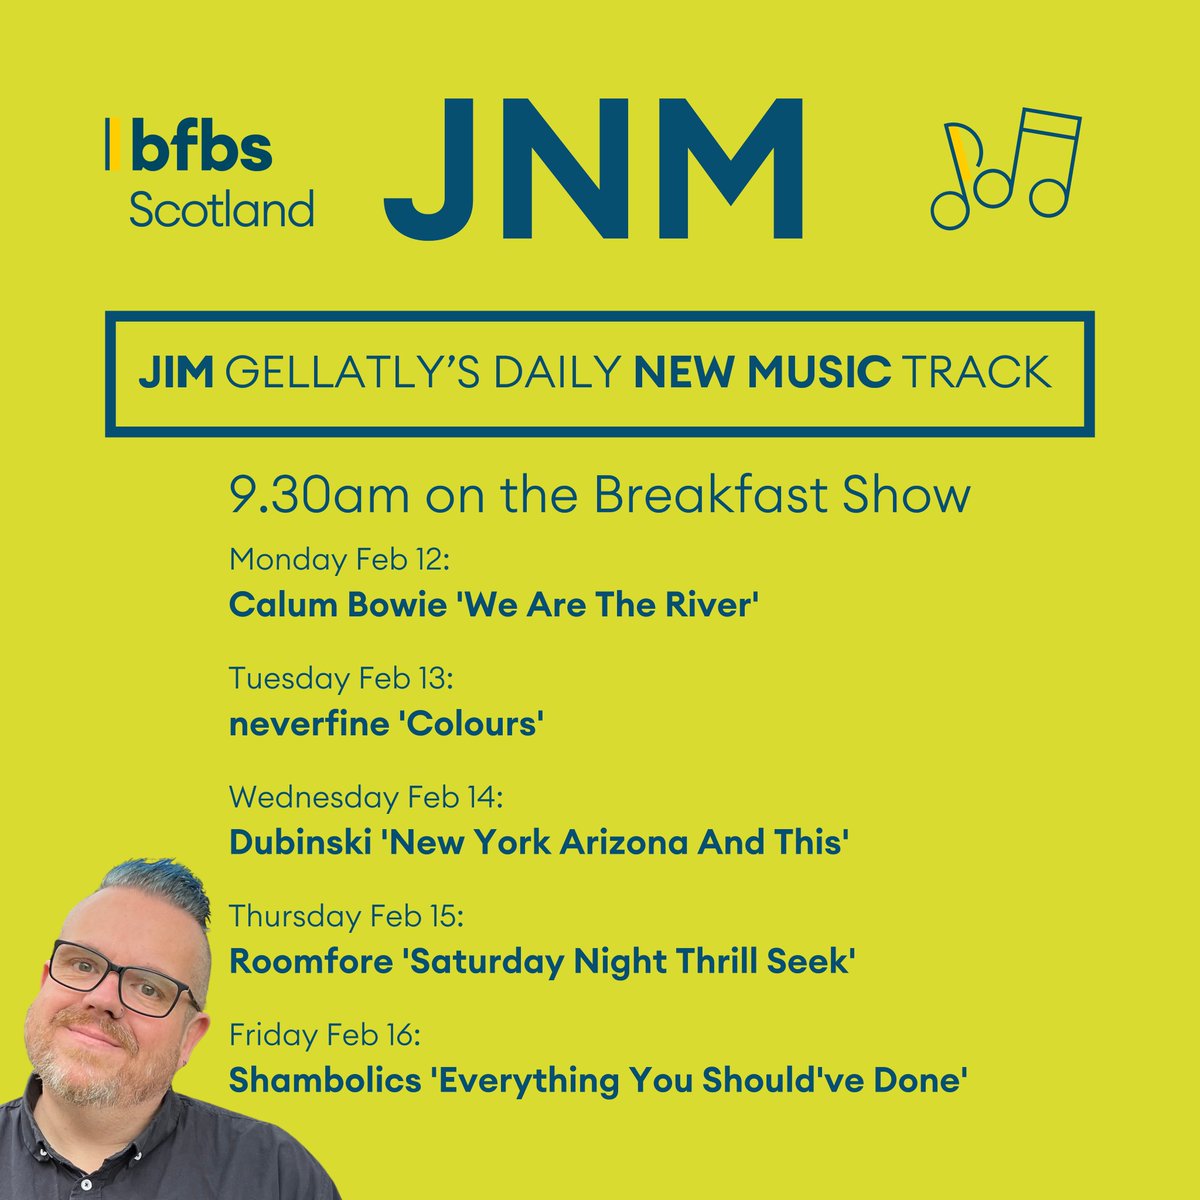 Every weekday we have new music from Scotland on the Breakfast Show! 🏴󠁧󠁢󠁳󠁣󠁴󠁿 Check out Jim's latest picks! 📻 radio.bfbs.com/stations/bfbs-…